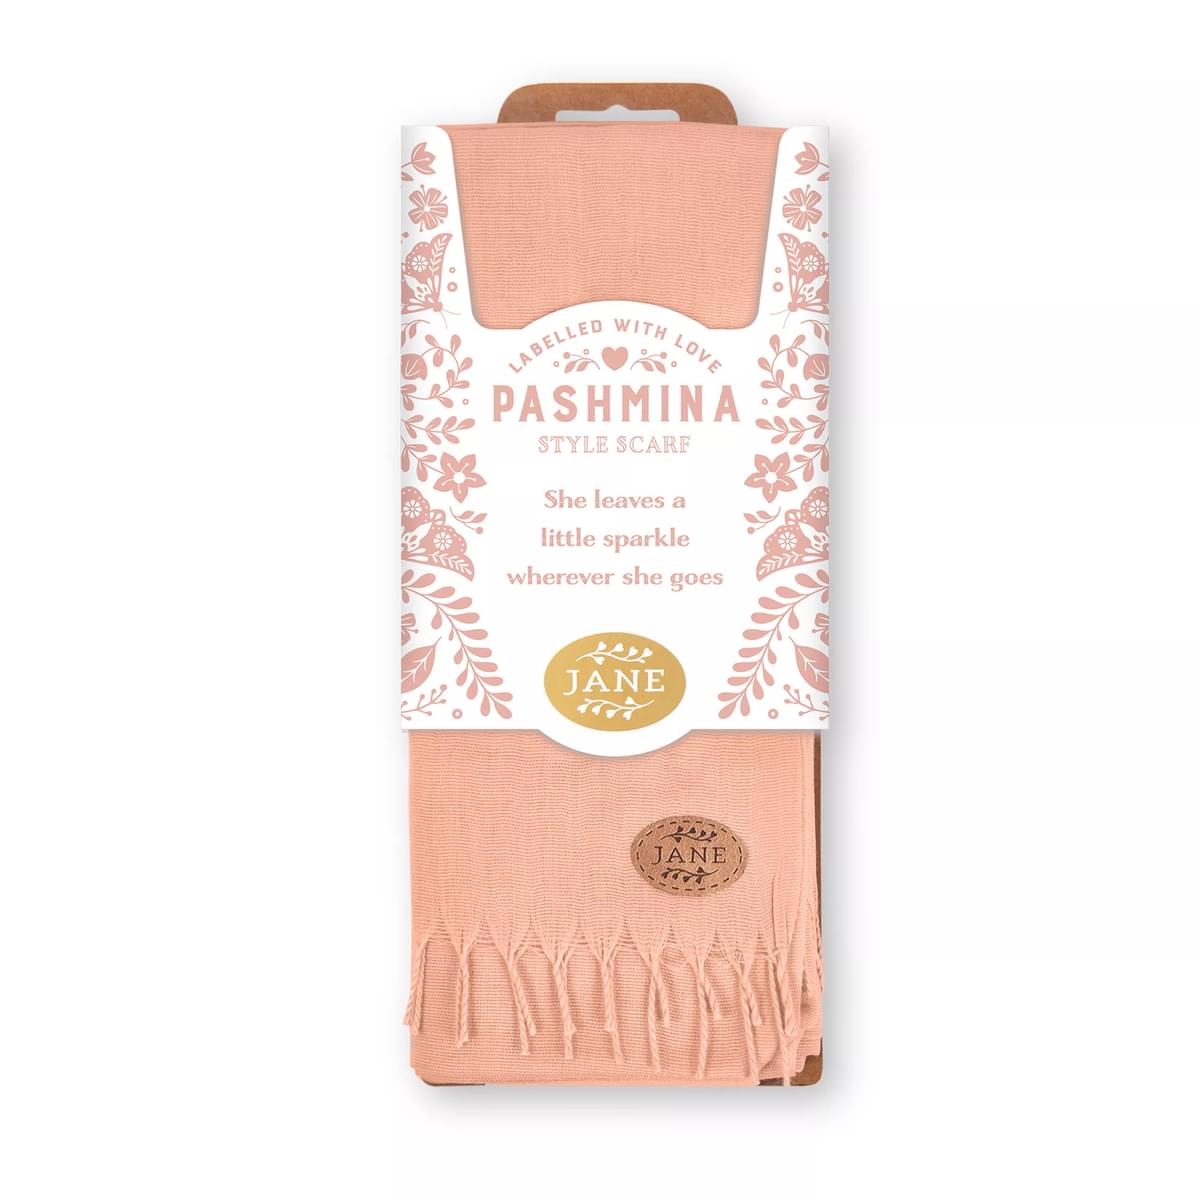 Labelled With Love peach fringed Pashmina personalised with the name Jane. In pretty peach and white floral packaging.